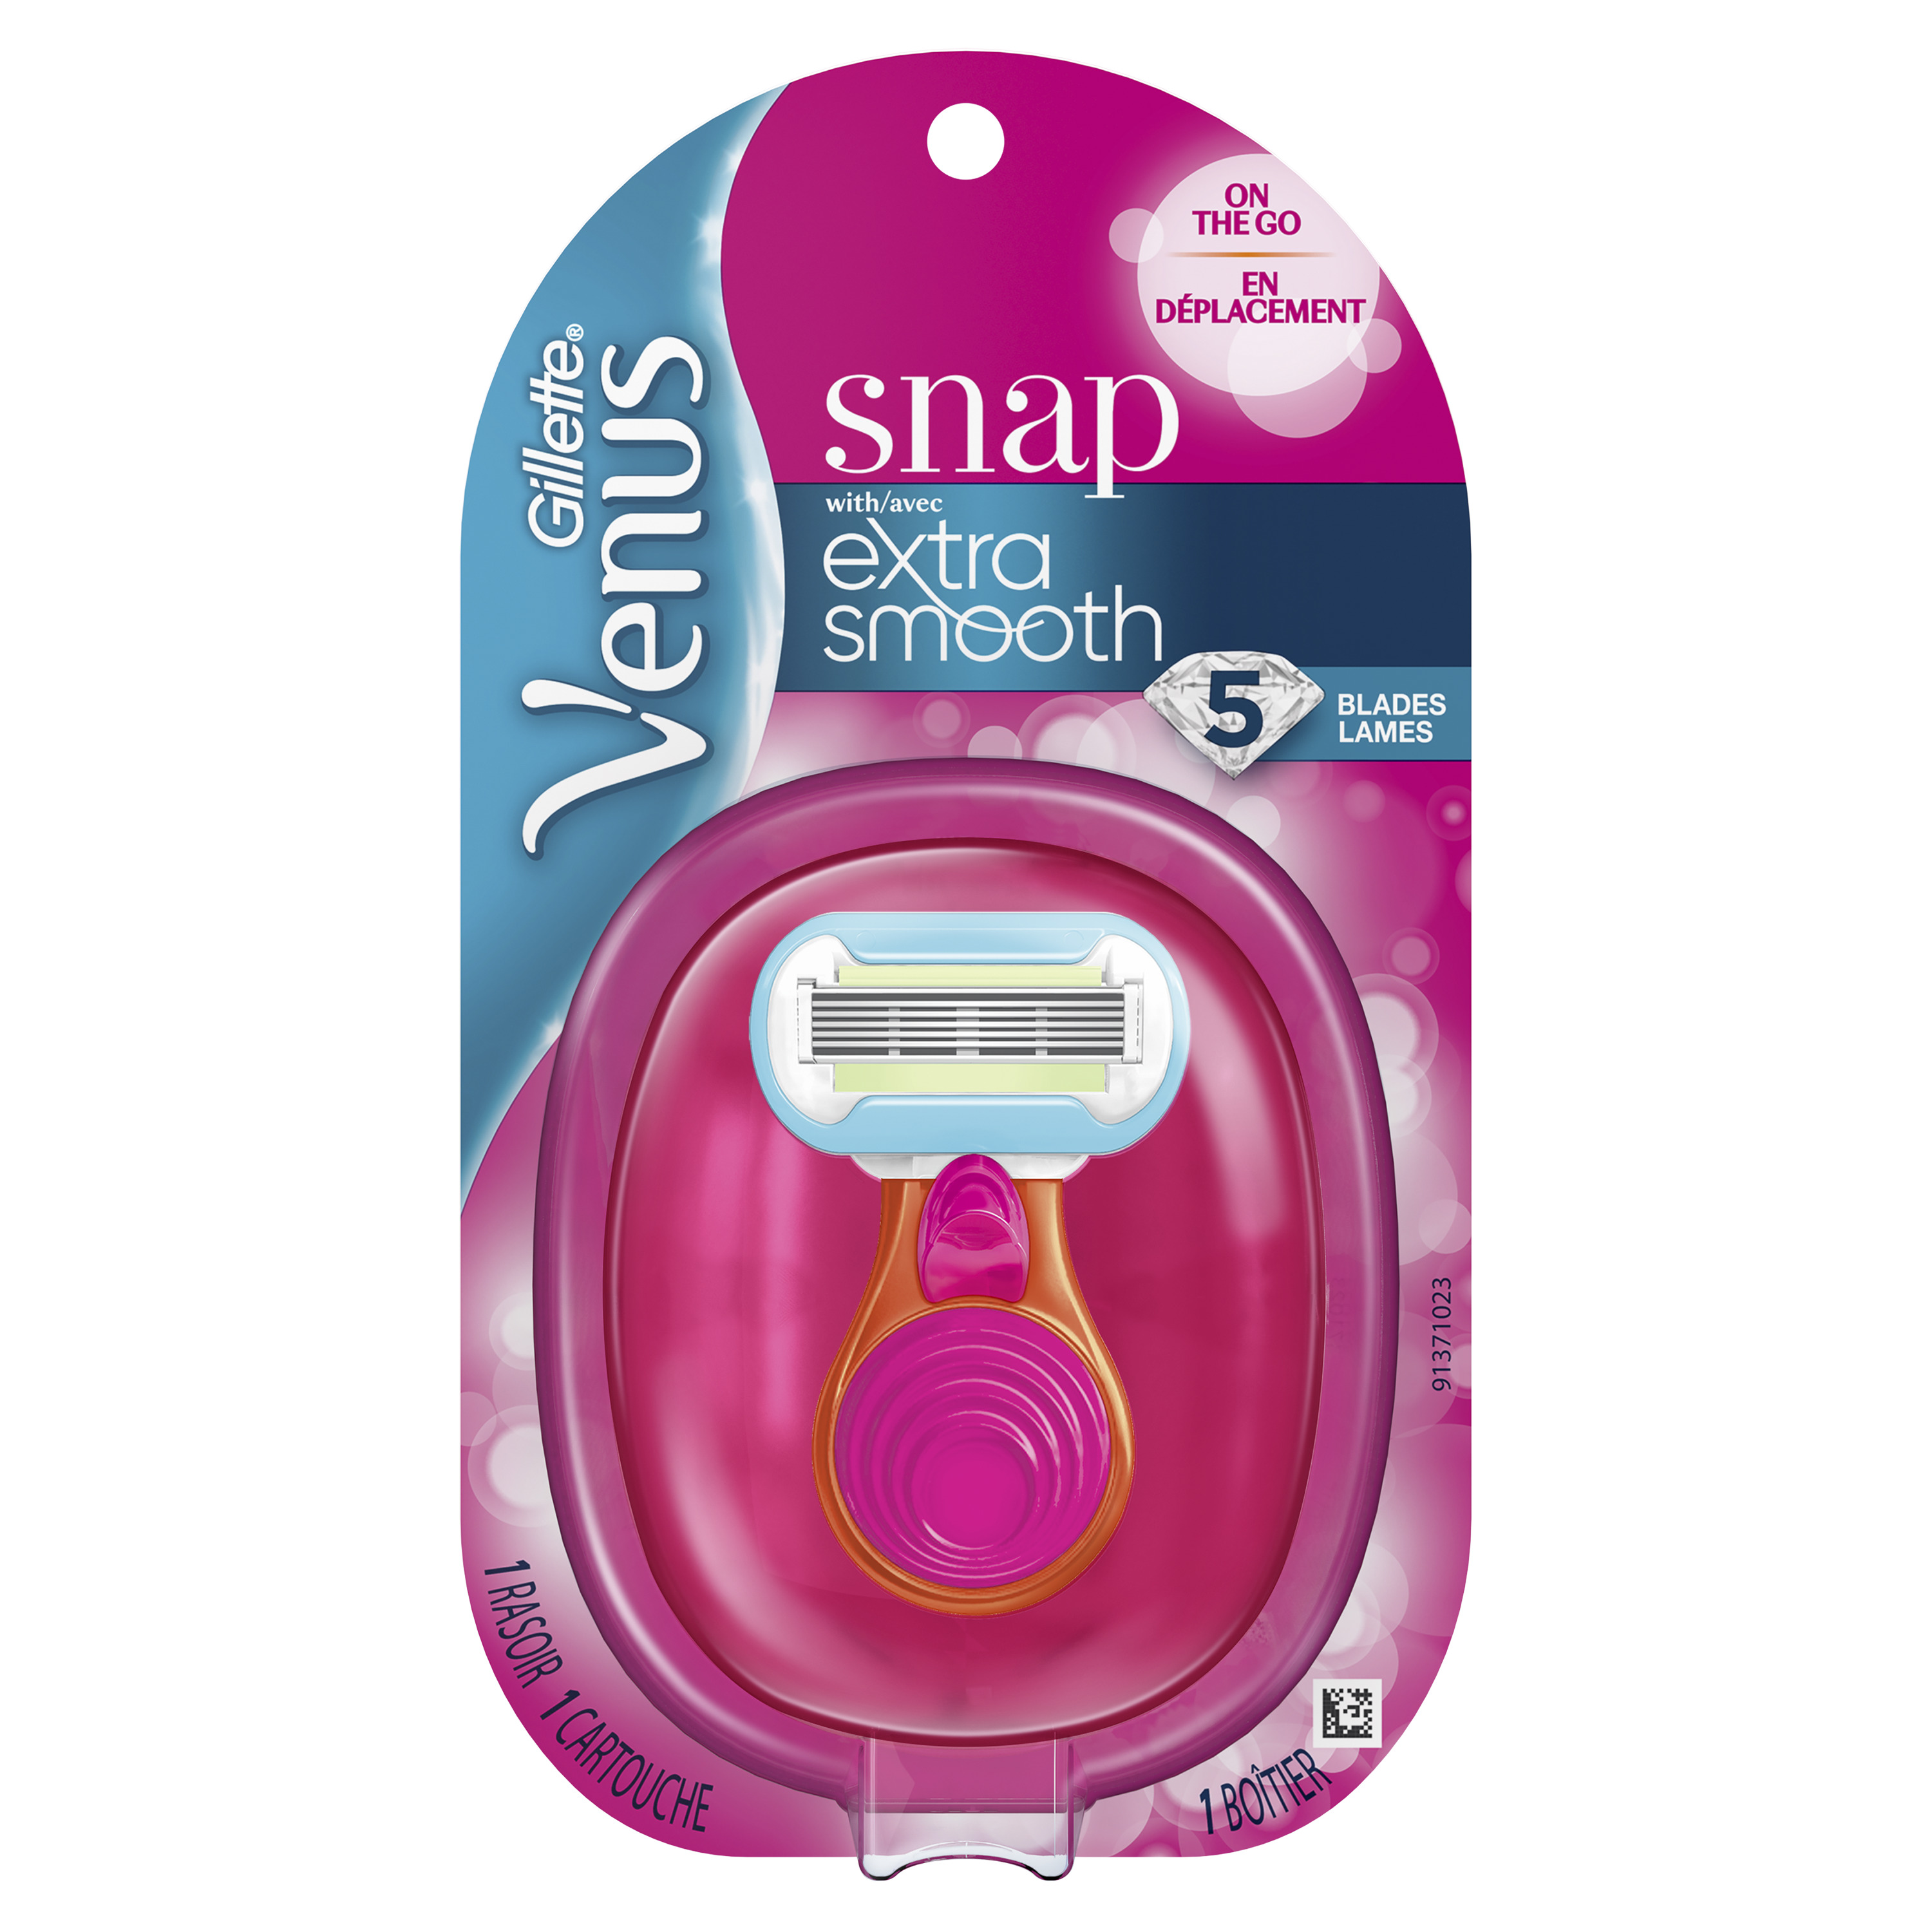 Gillette Venus Snap Cosmo Pink with Extra Smooth Women's On-the-Go Razor, 1 Handle & 1 Refill - image 1 of 8